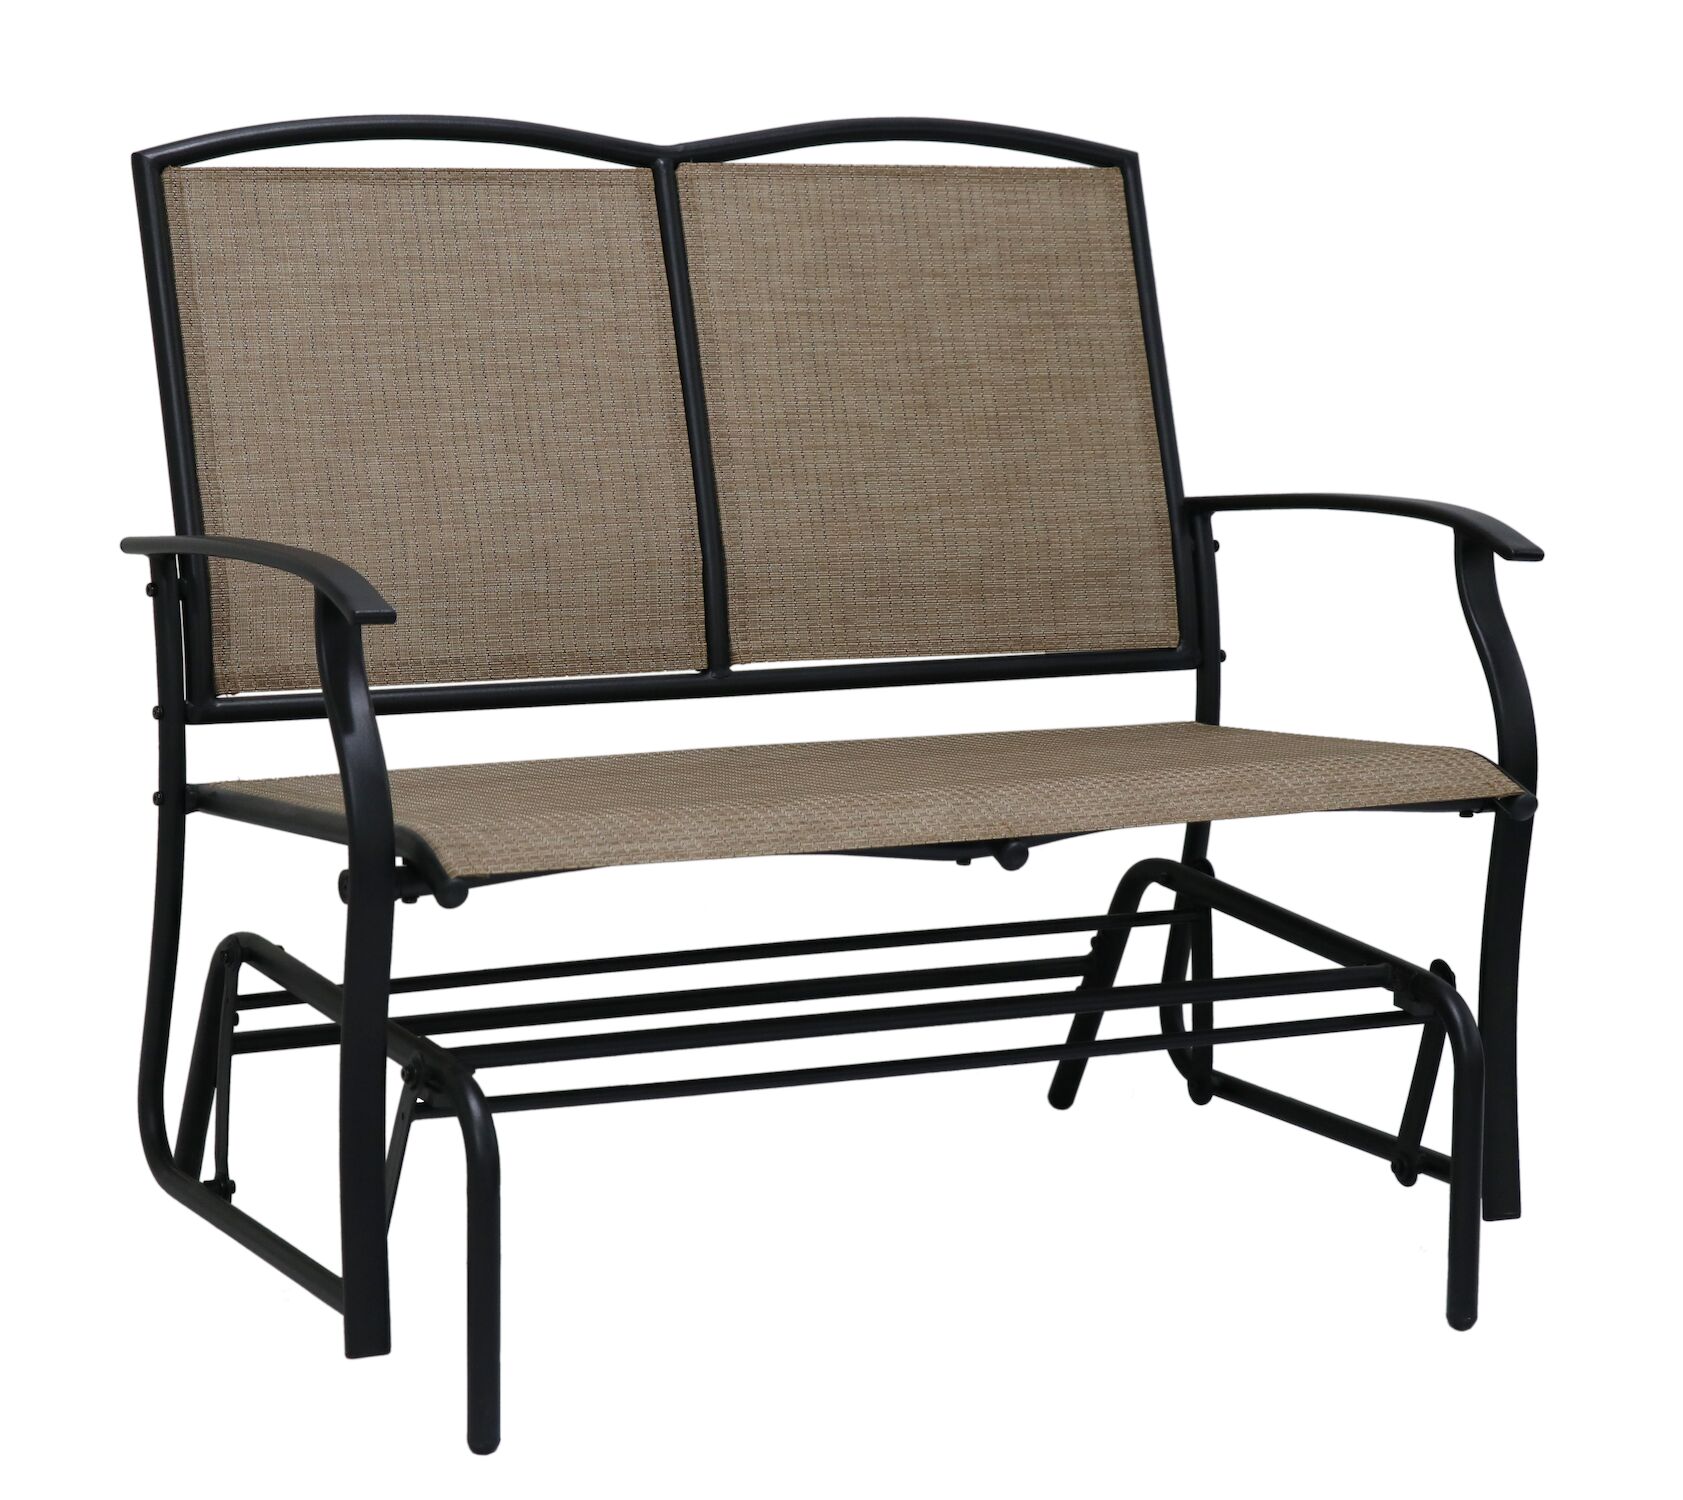 BROWN SLING DOUBLE GLIDER NAT-S21-PAT009.png